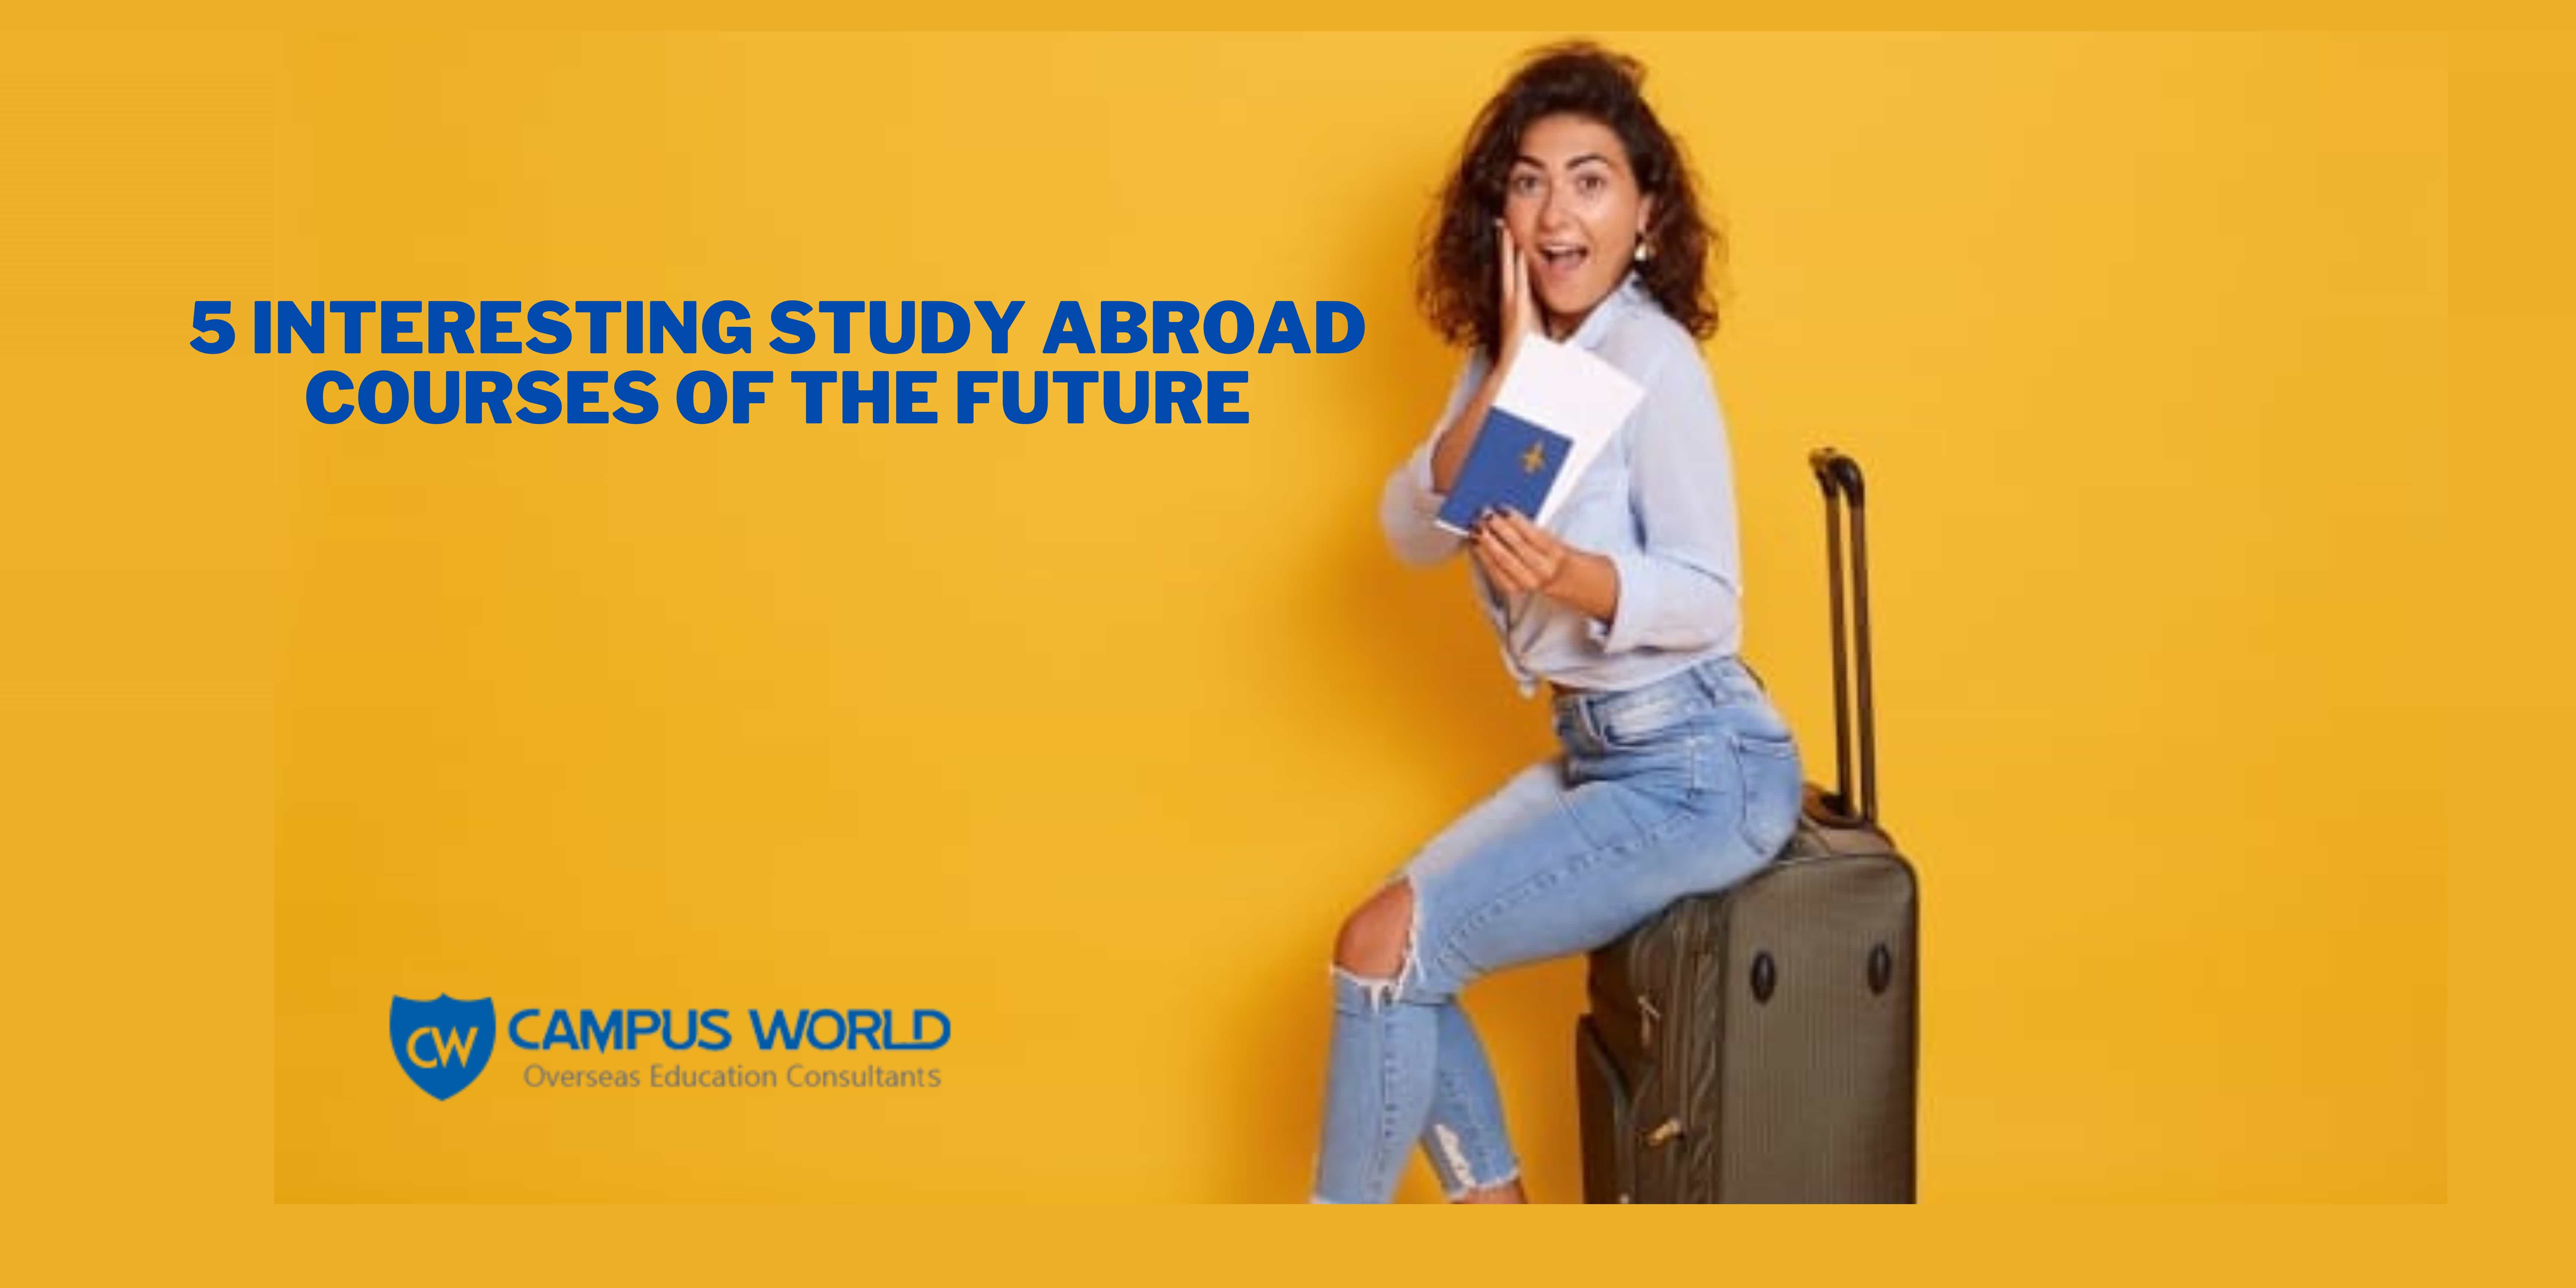 5 Interesting Study Abroad Courses of the Future